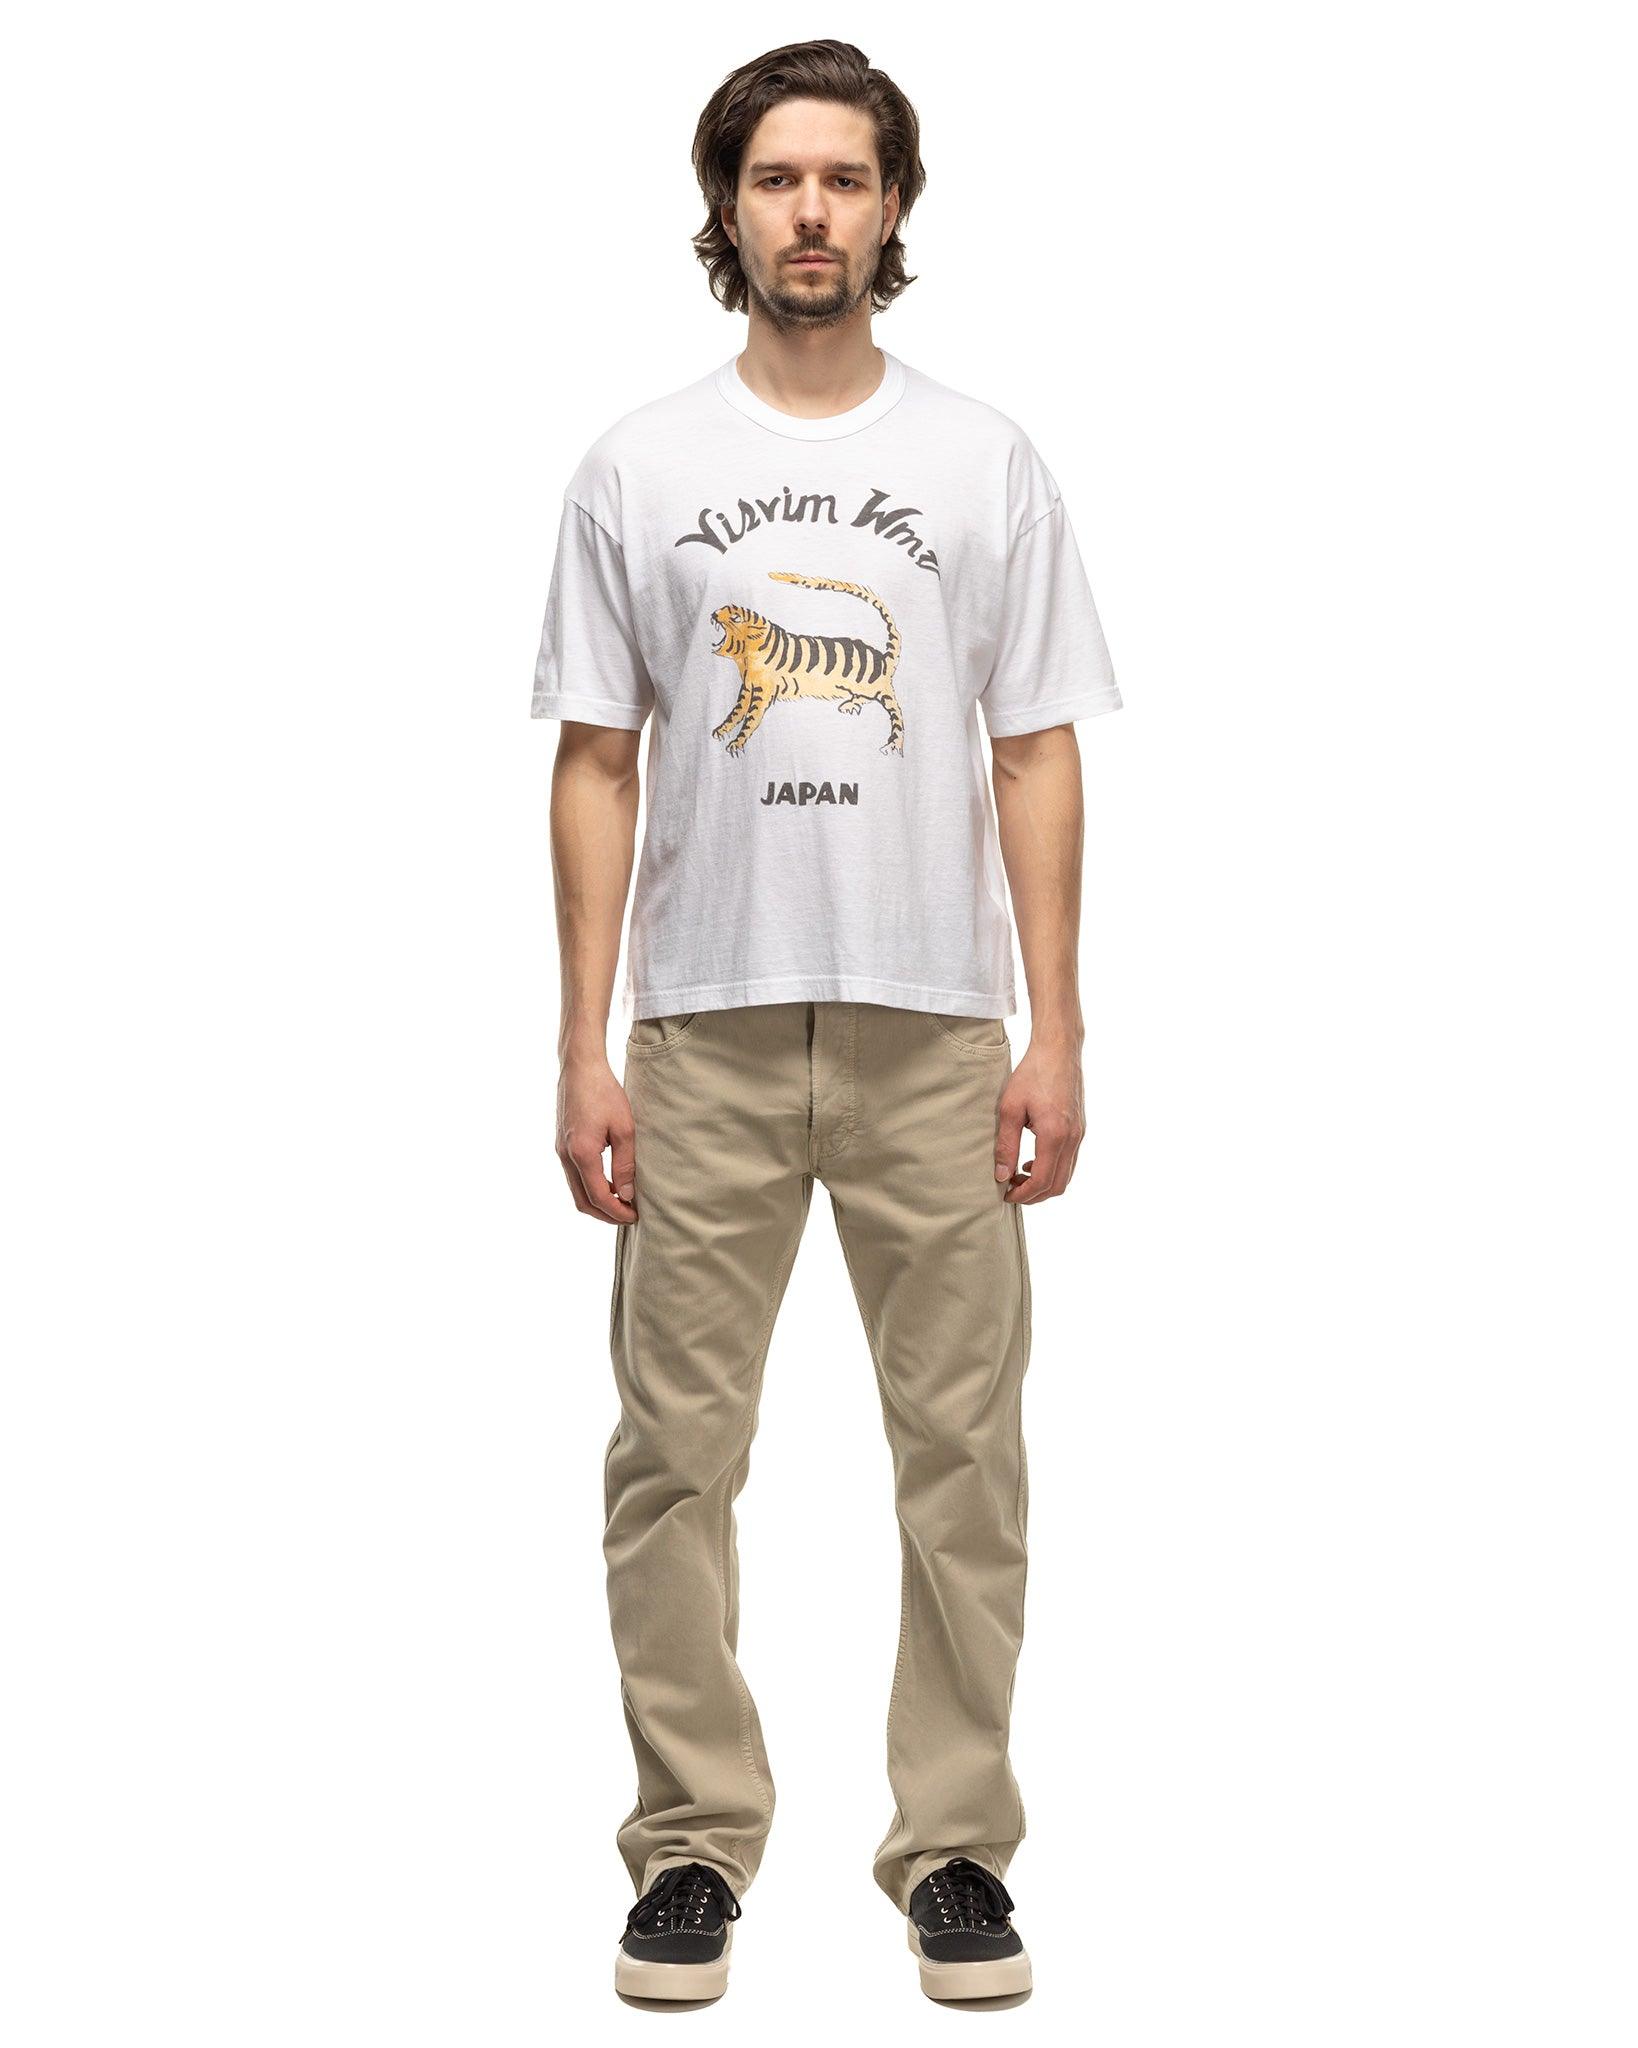 x Undercover SOUKUU Hike Technical Graphic Tee Bright White | HAVEN